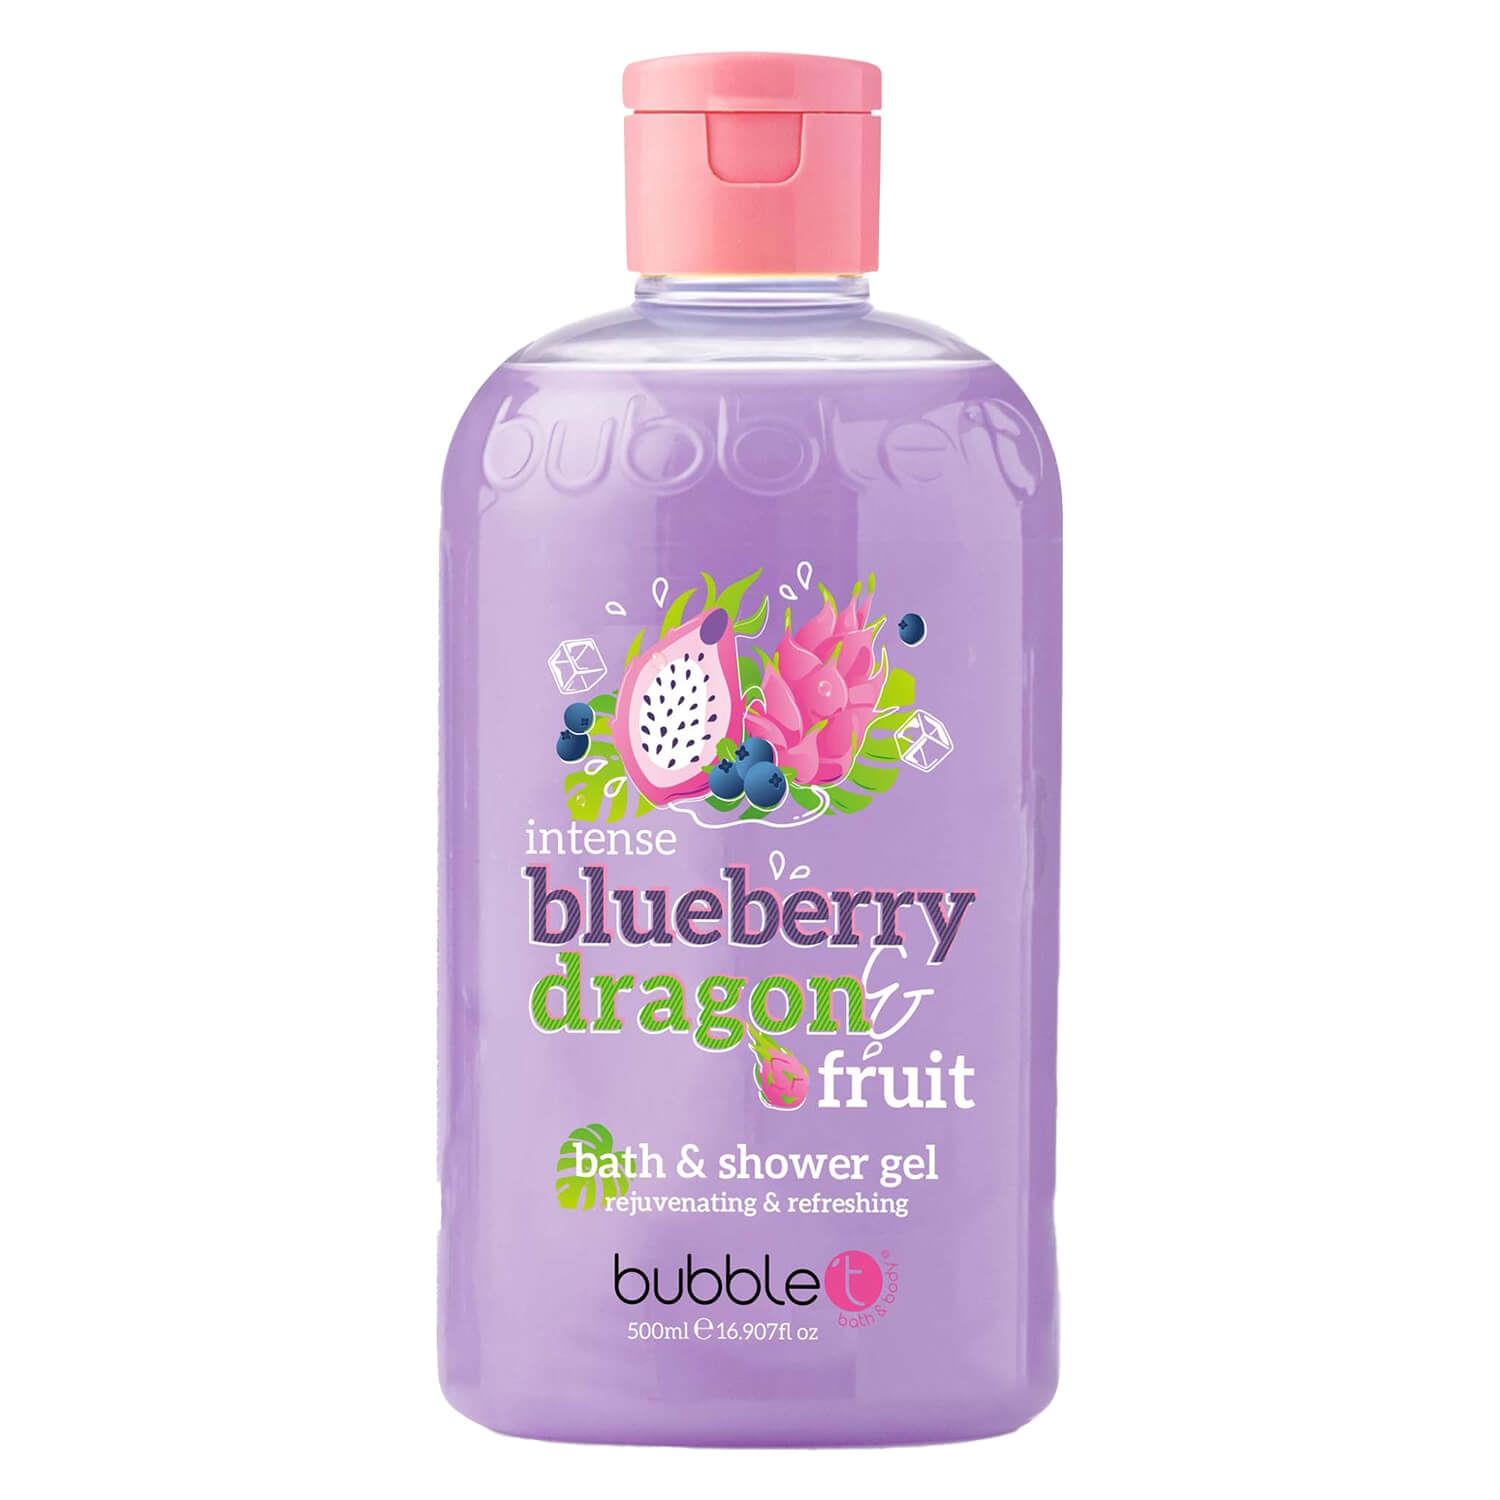 Product image from bubble t - Bath & Shower Gel Blueberry & Dragonfruit